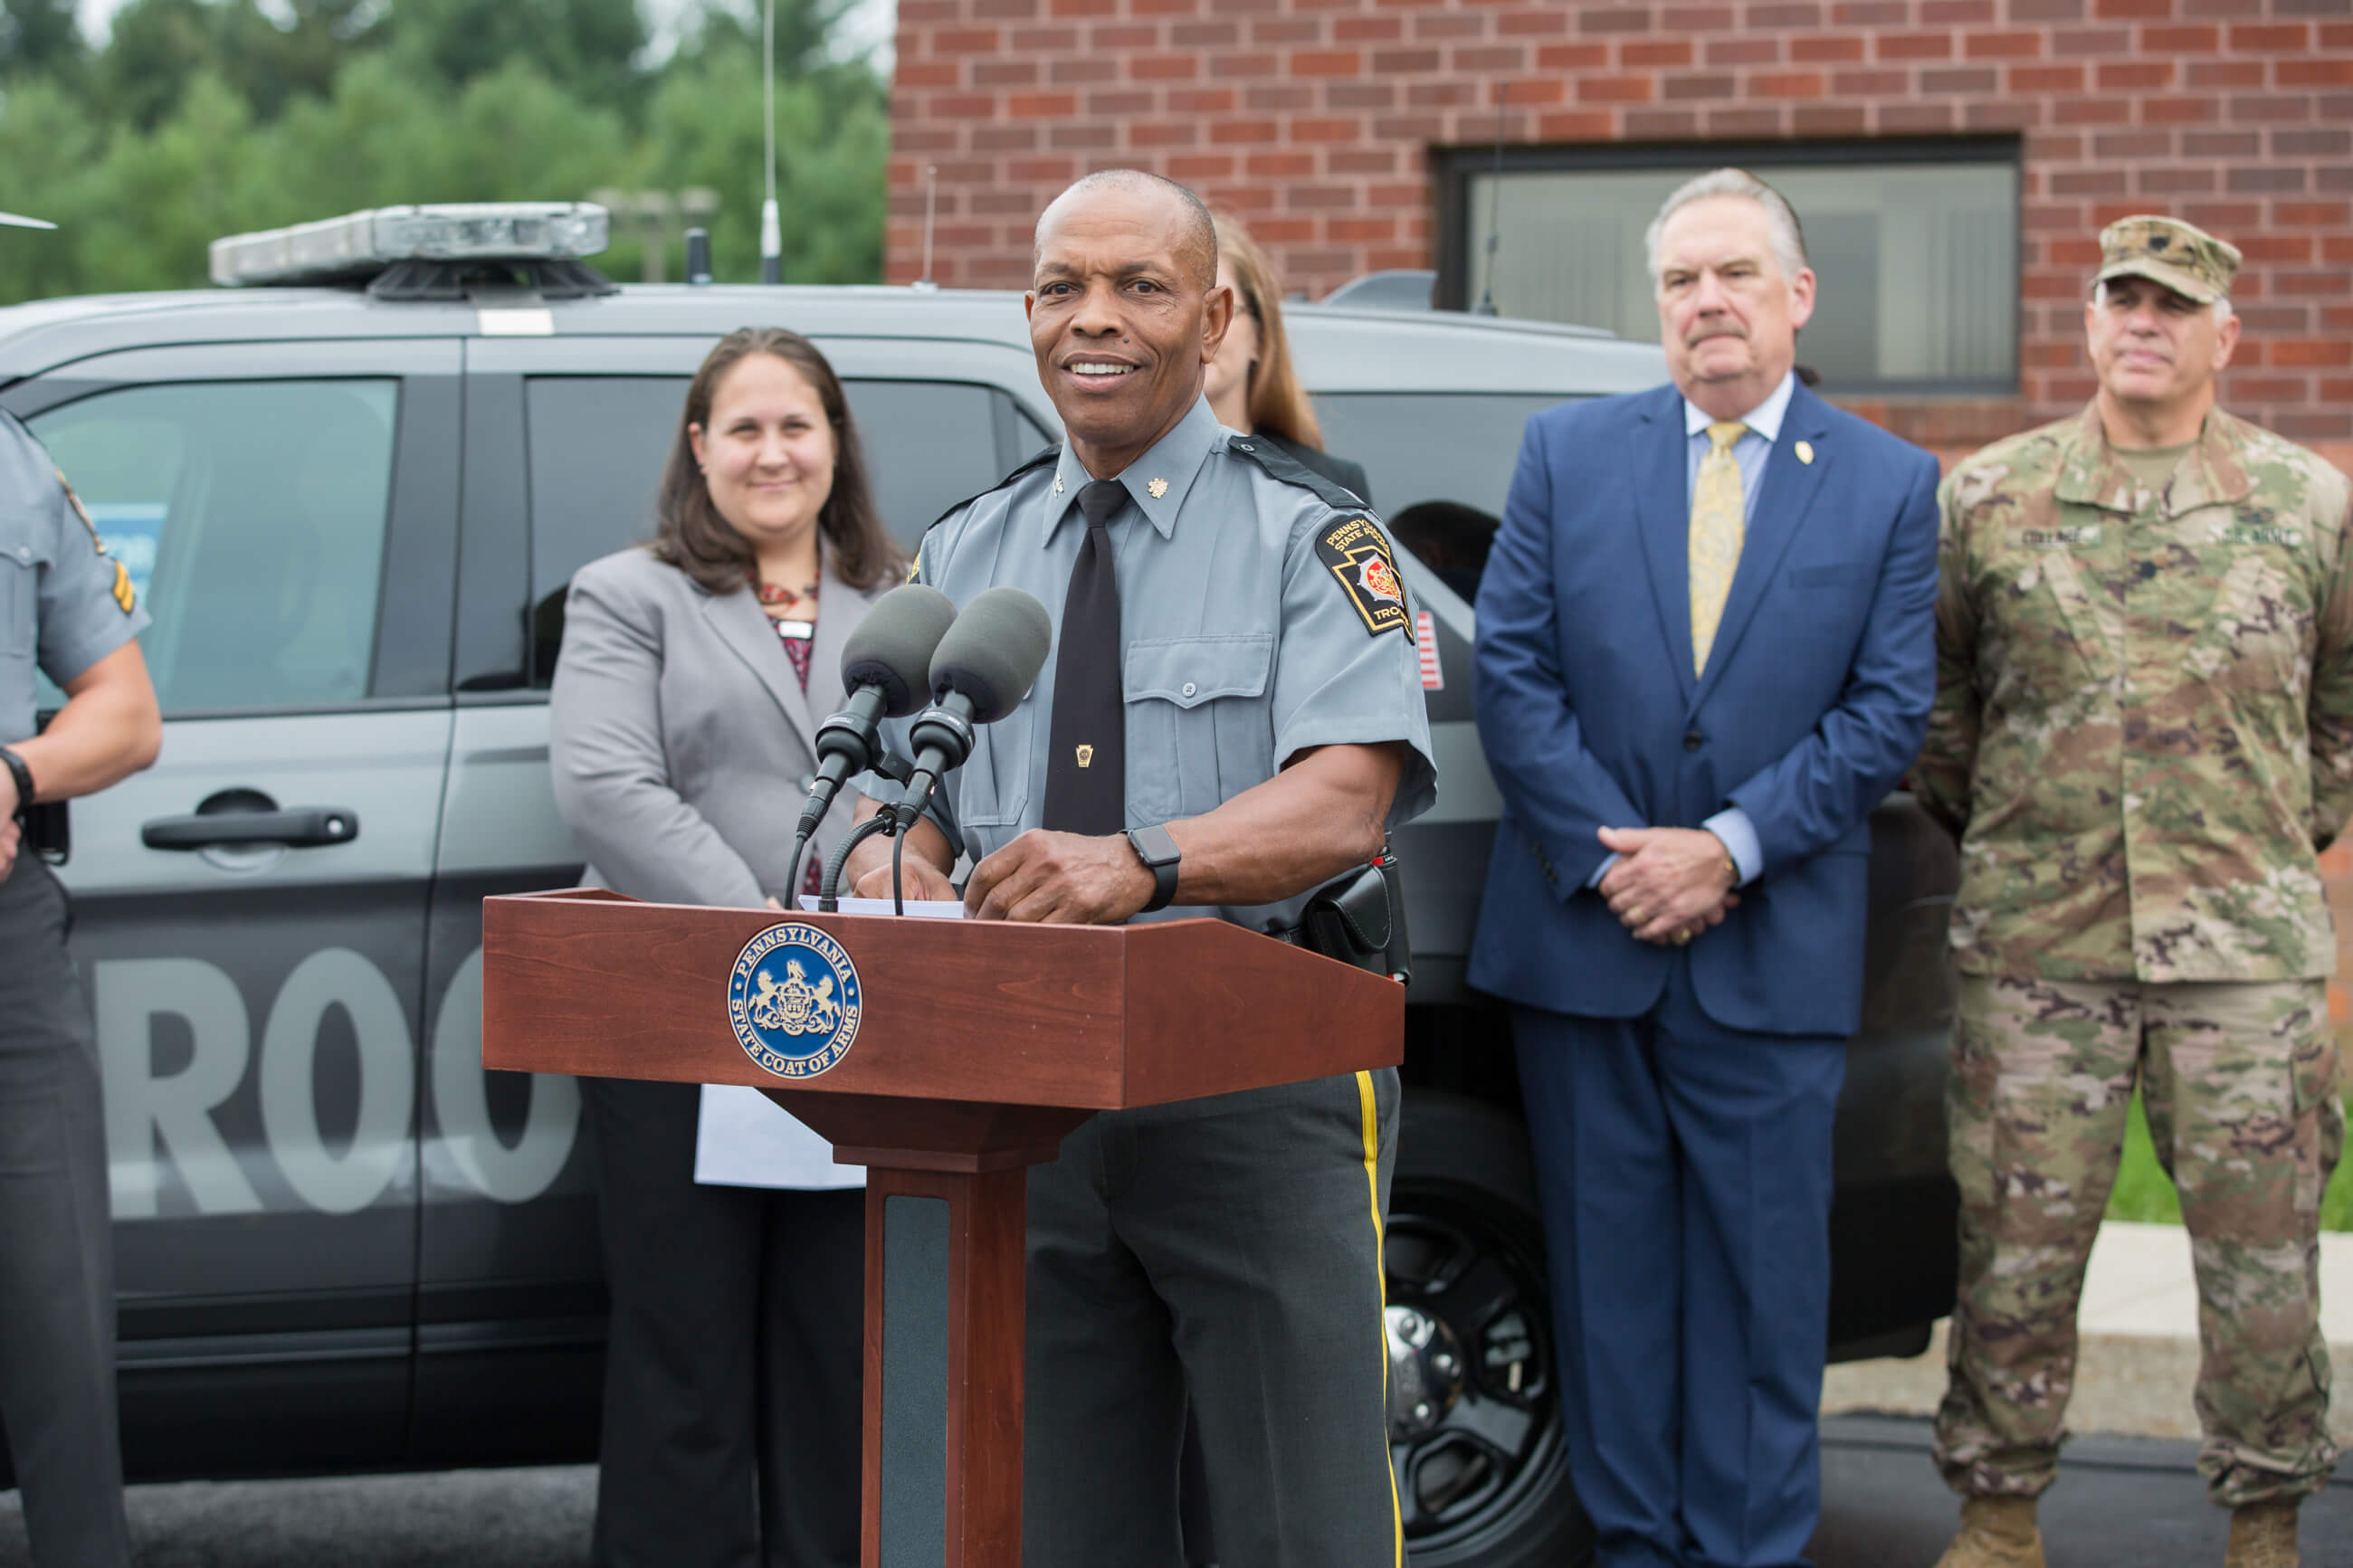 Pennsylvania State Police Commissioner Tyree C. Blocker speaks about the opioid epidemic.